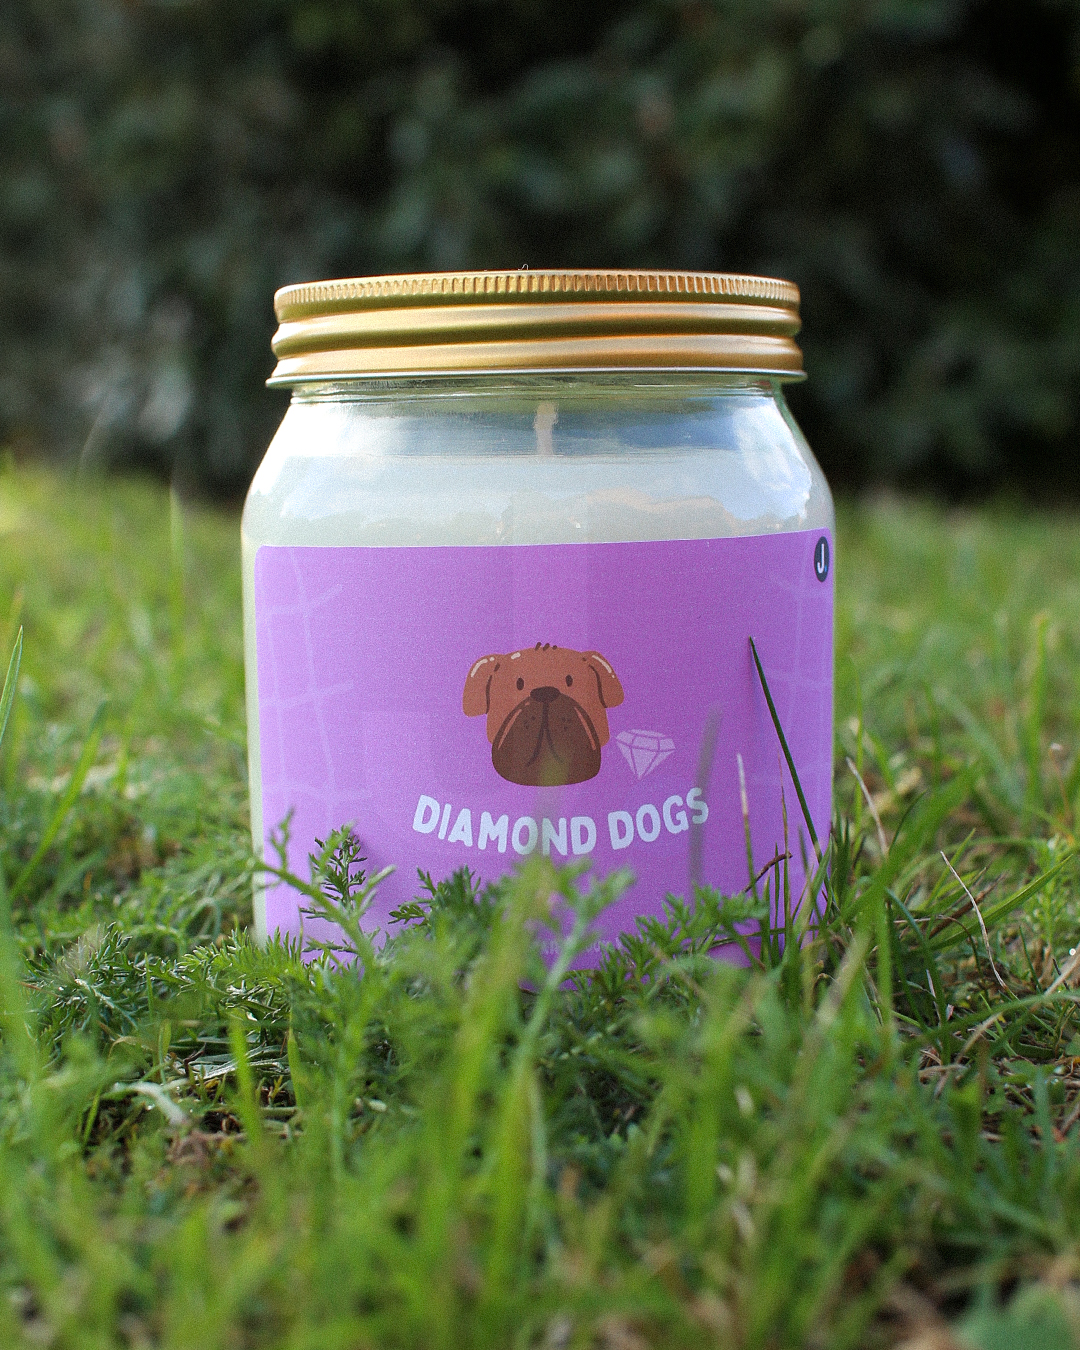 Ted Lasso Candle - Diamond Dogs Candle (Juniper & Cedar) - Ted Lasso Inspired Candle